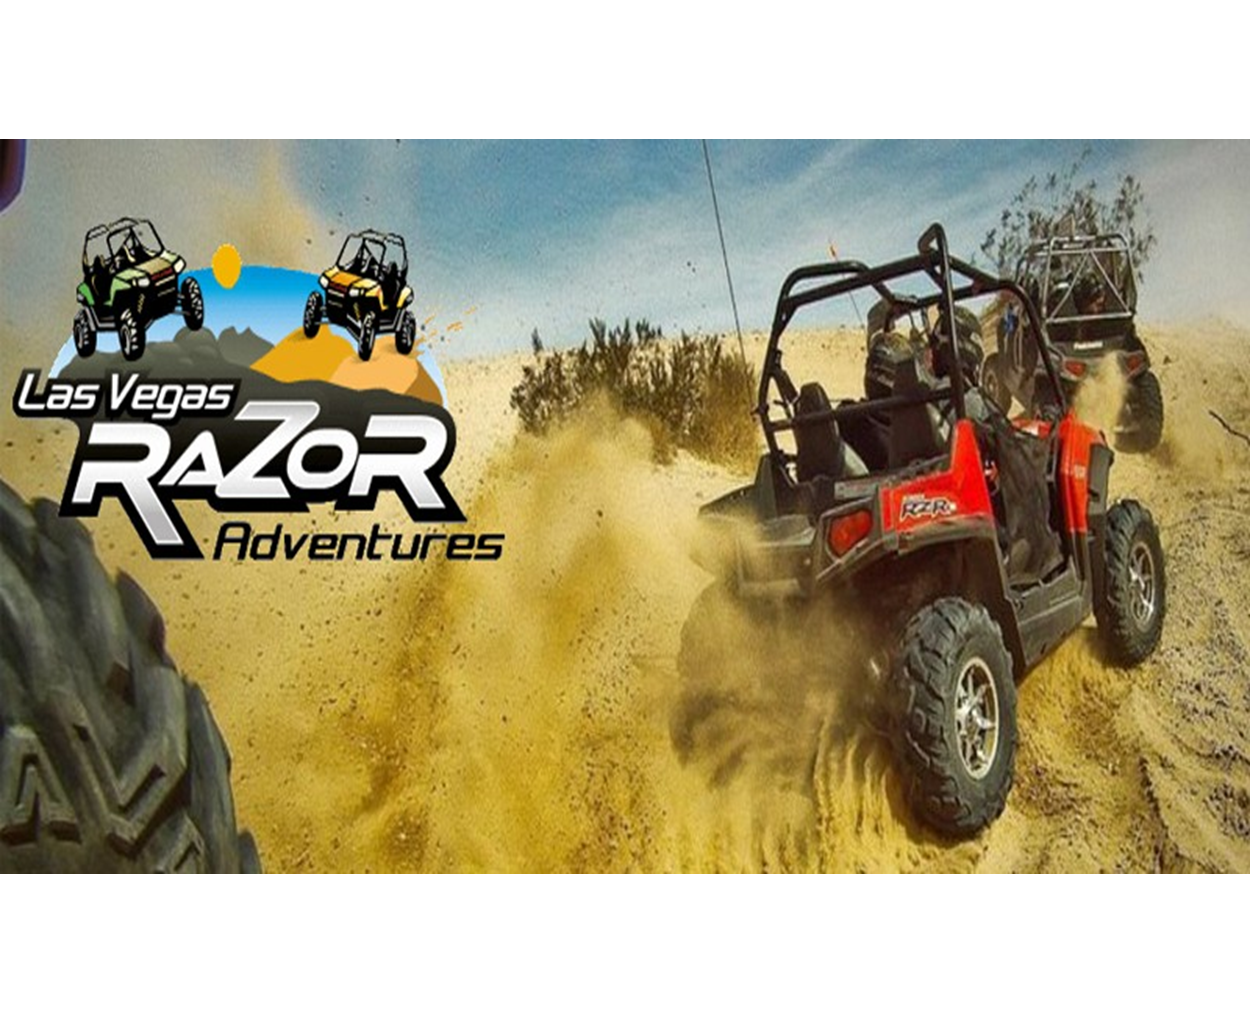 dune buggy off road tours